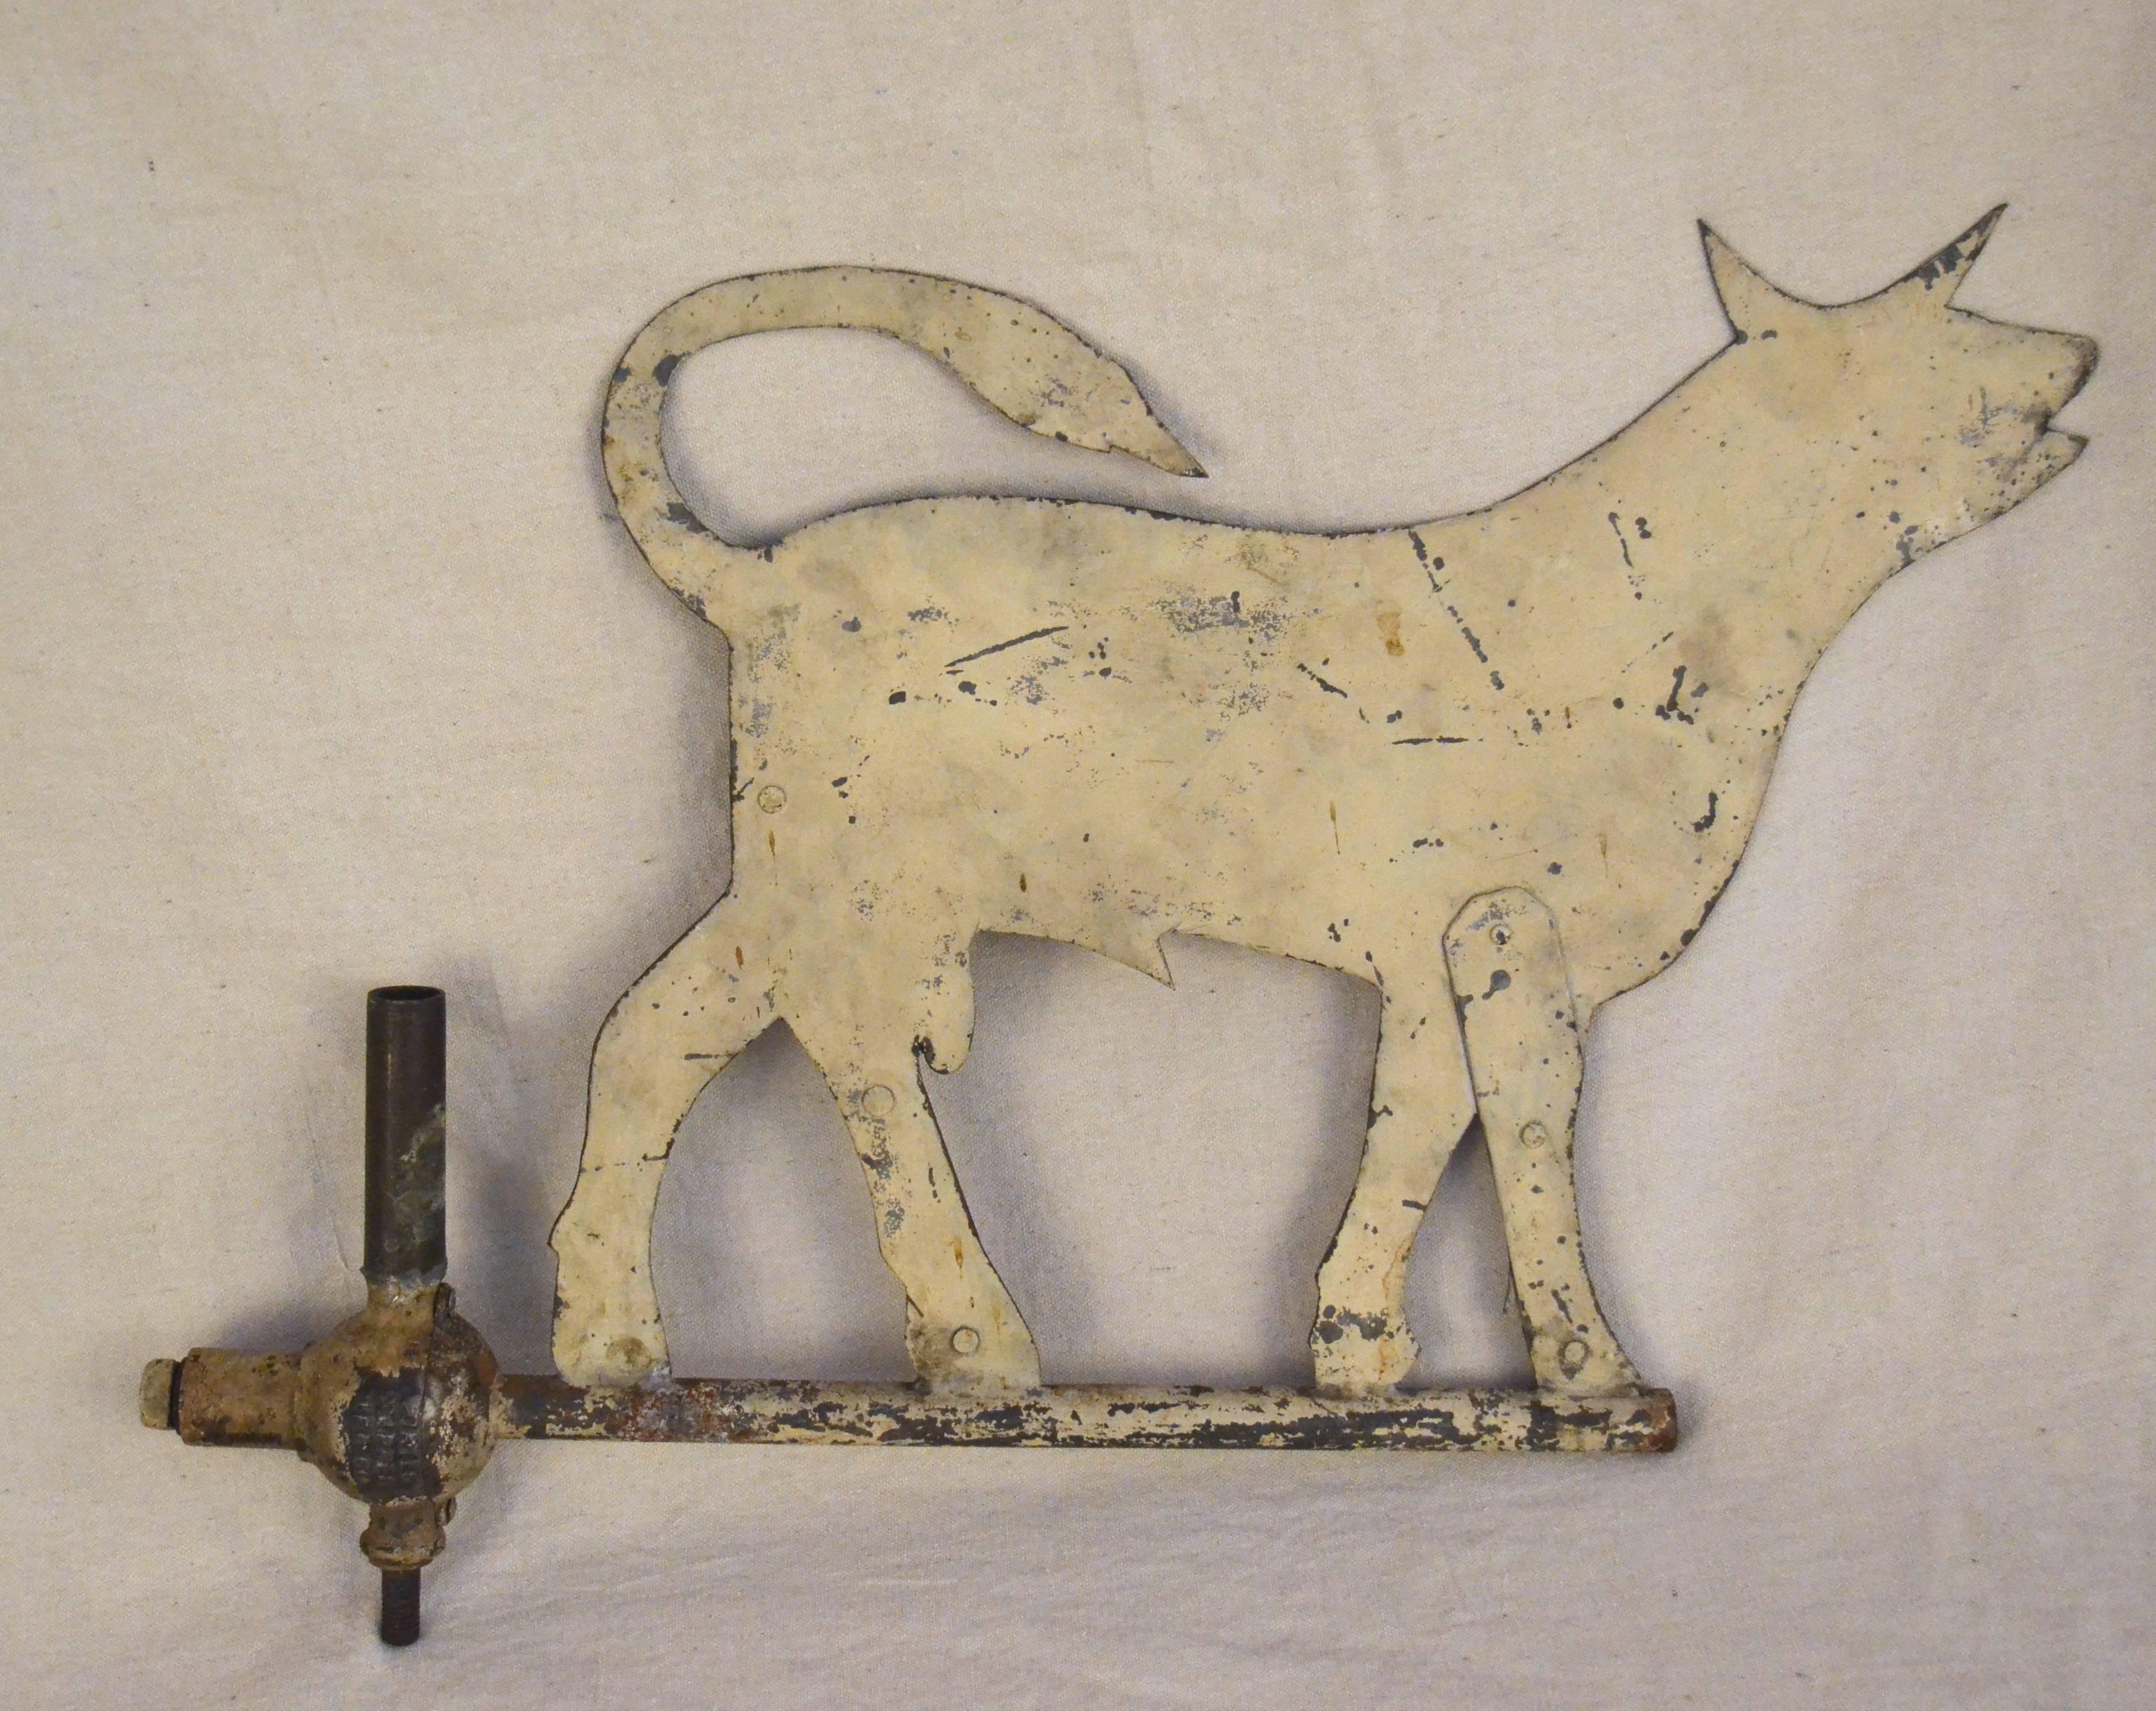 Painted sheet iron bull form weathervane painted white on one side and black with detailing on the other. An individual effort of great graphic form and interesting construction. Two of the bull's legs have double sheets of iron for added strength.